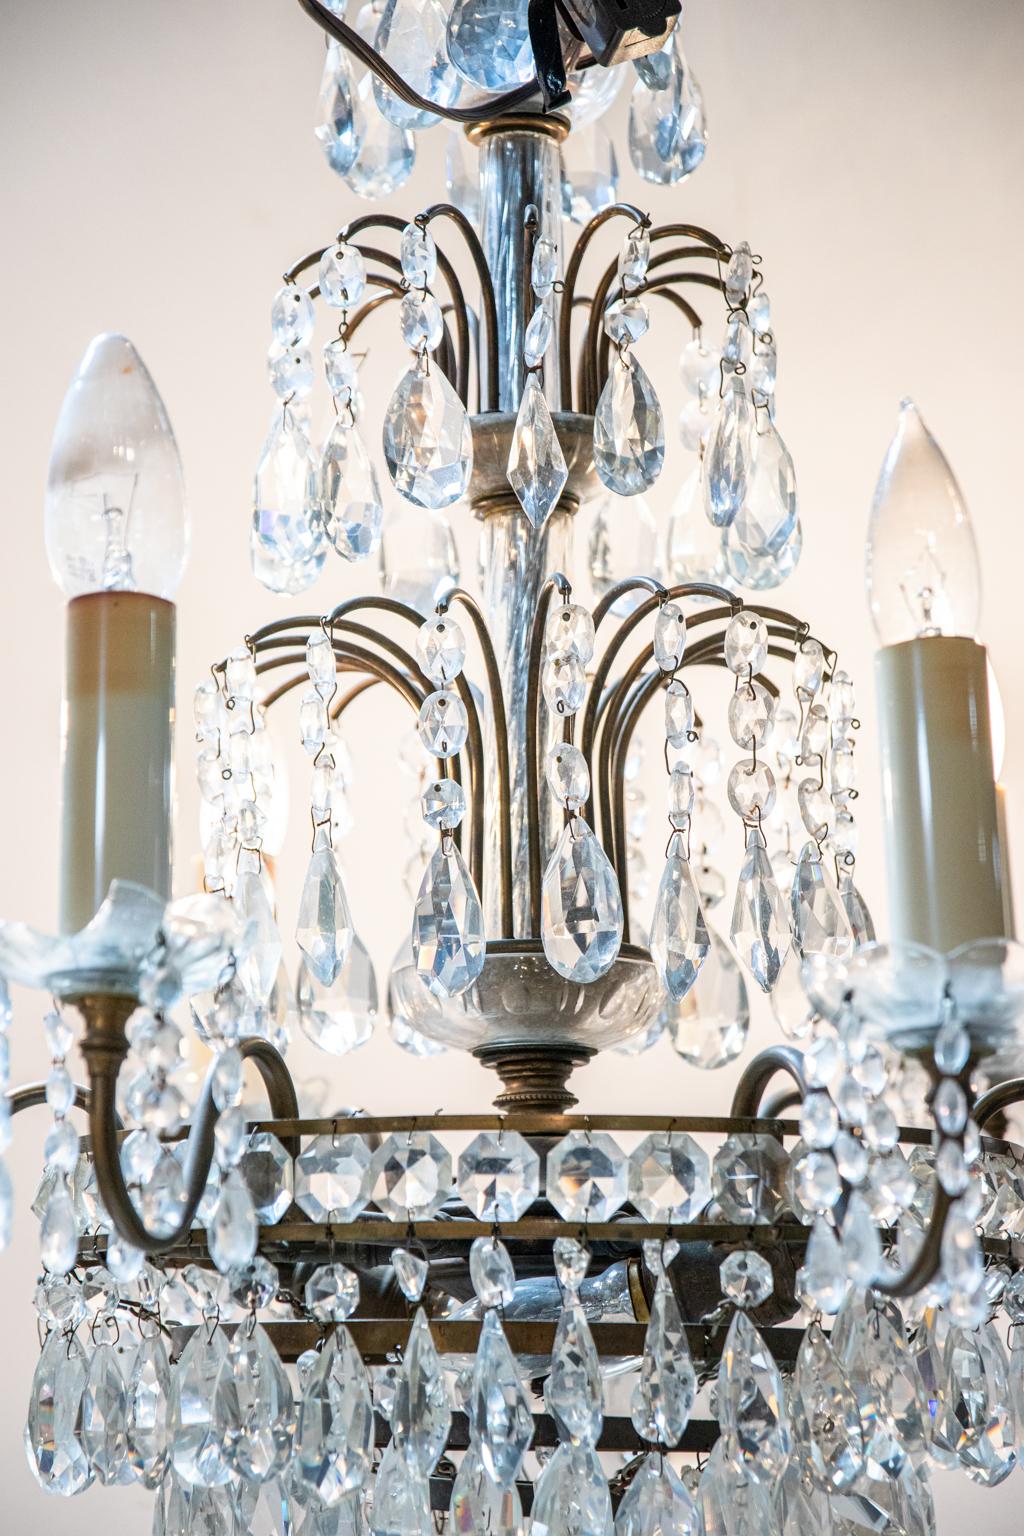 Bronze and cut crystal chandelier with four tiers of almond pendant crystal prisms. The piece features further almond shaped prisms hanging underneath the scalloped trim bobeches. Please note of wear consistent with age including patina to the